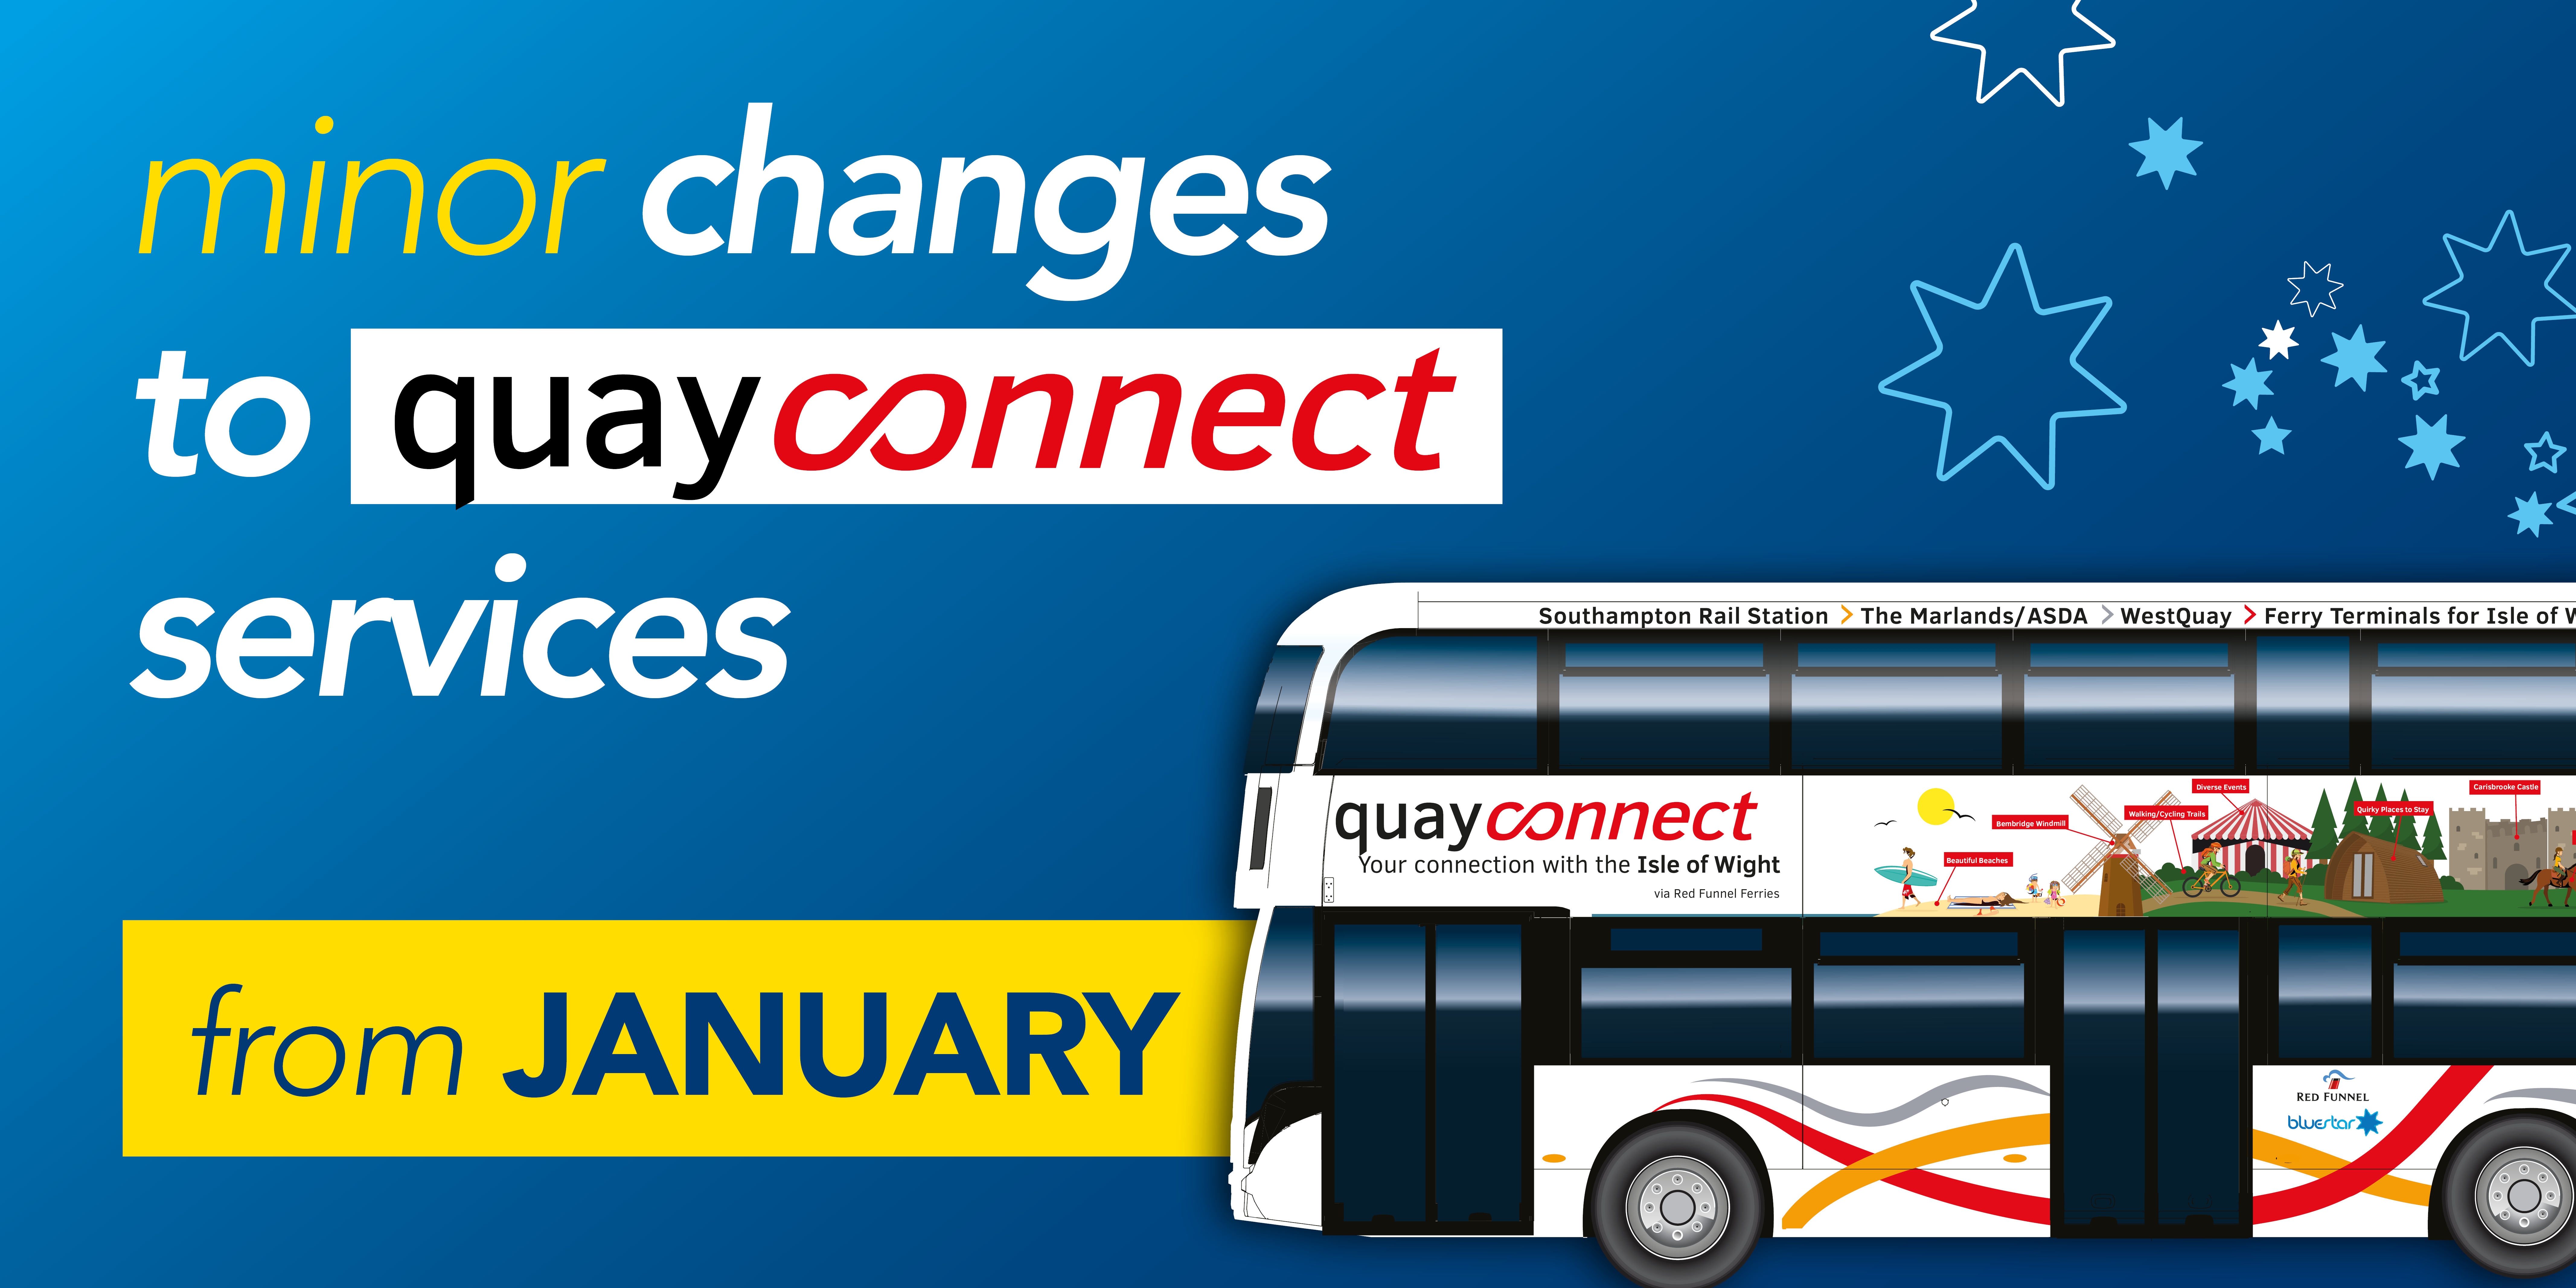 Minor changes to Quayconnect from January